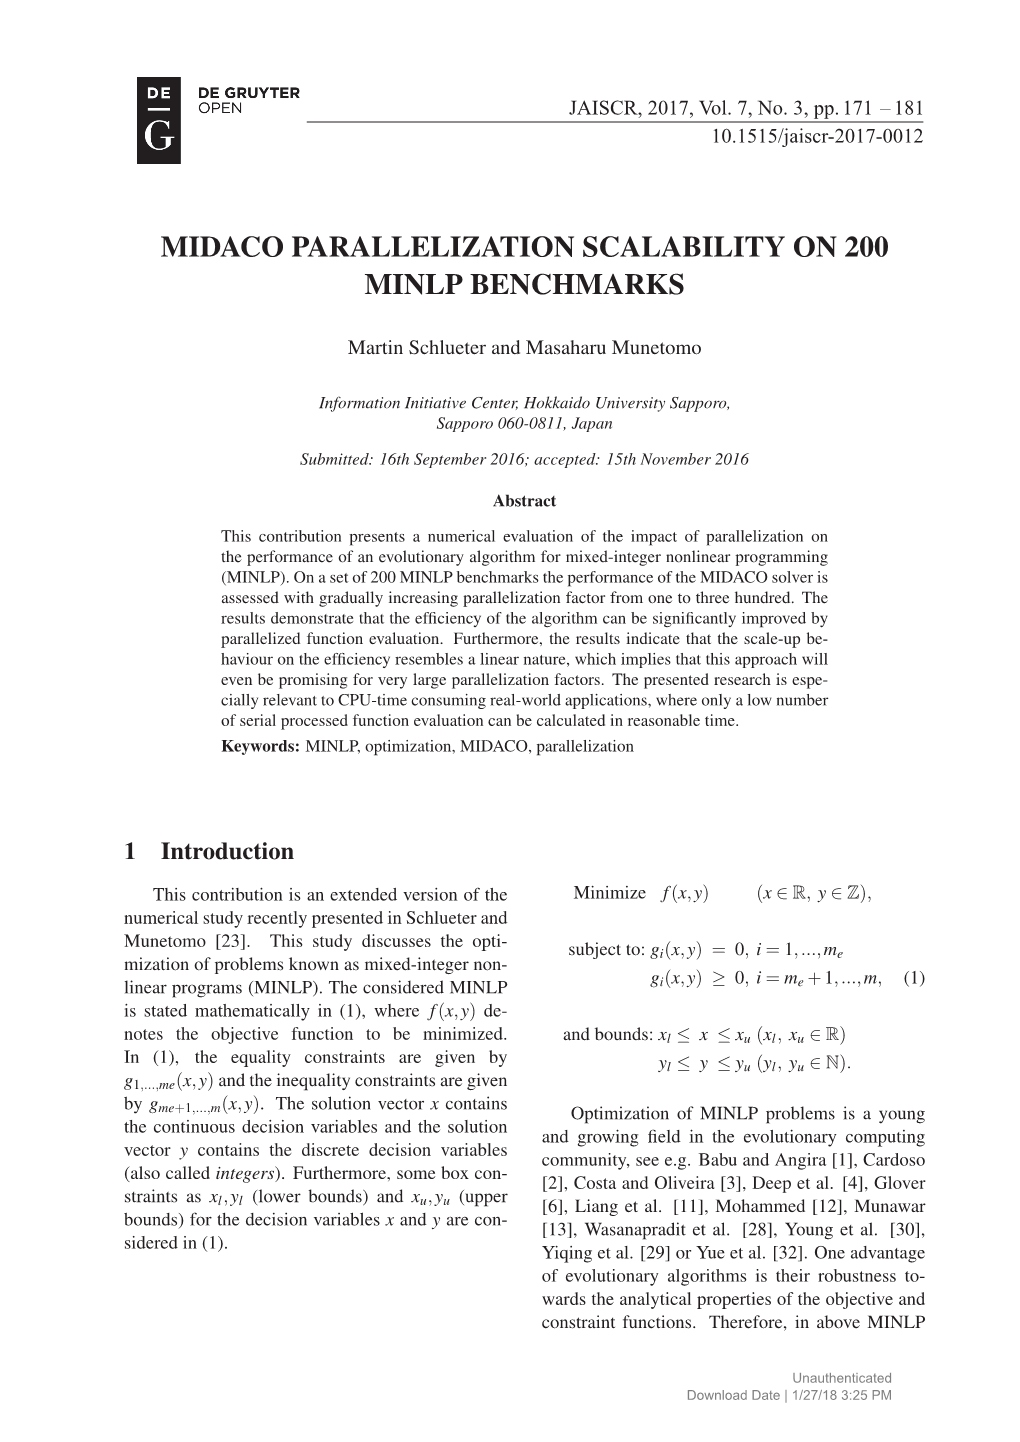 Midaco Parallelization Scalability on 200 Minlp Benchmarks